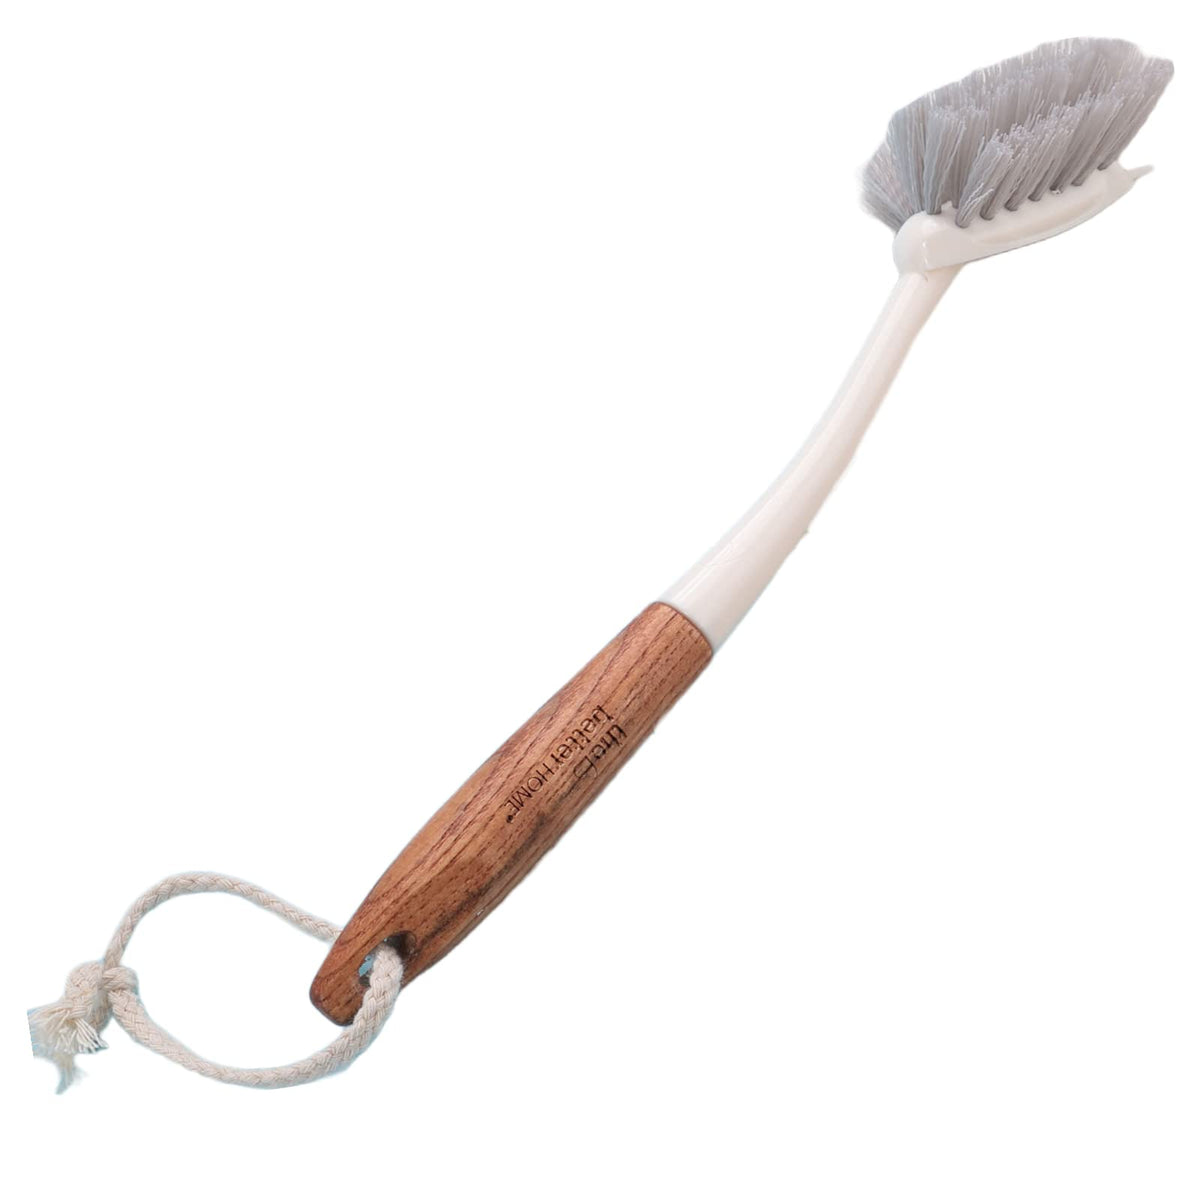 Wooden Kitchen Cleaning Brush | Cleaning Brush for Utensils and All Surfaces | Wet and Dry Cleaning Brush for Kitchen